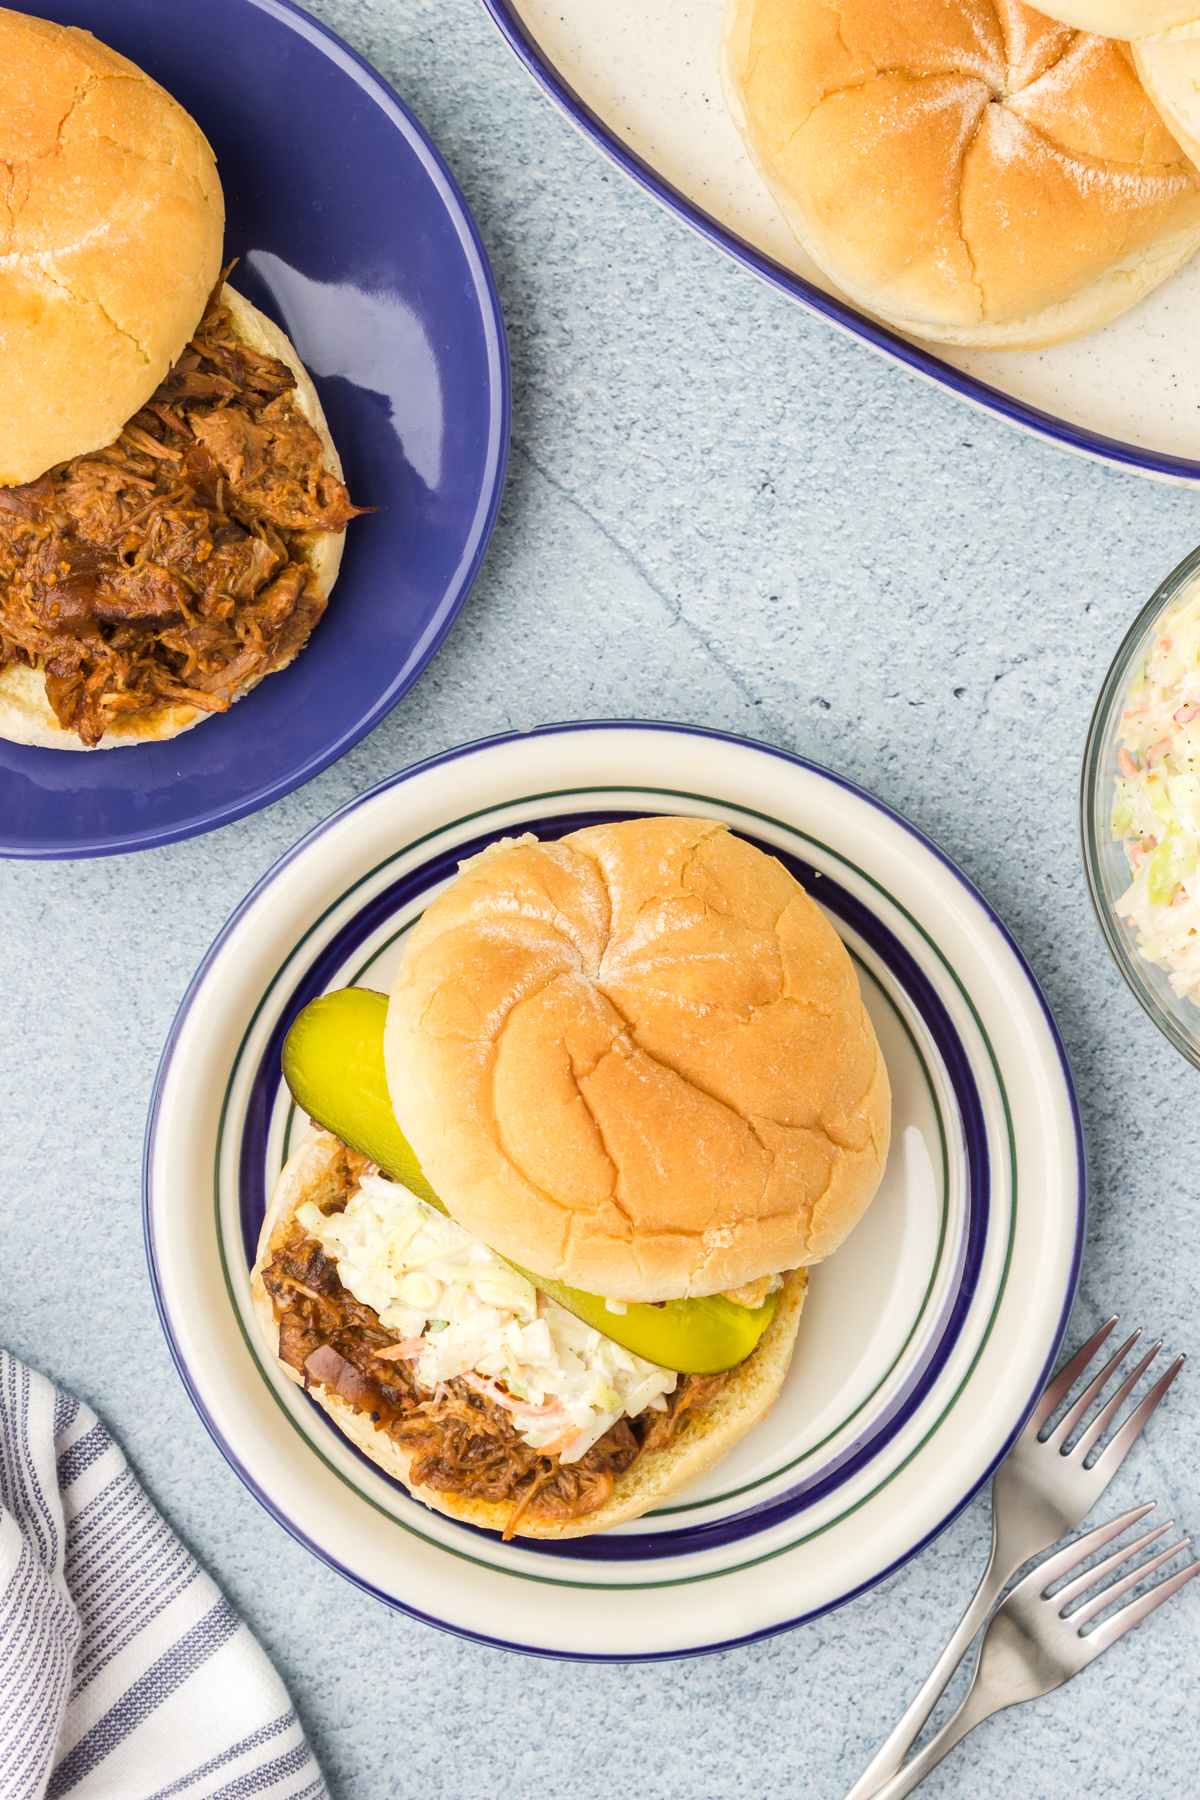 BBQ pulled pork sandwiches on plates